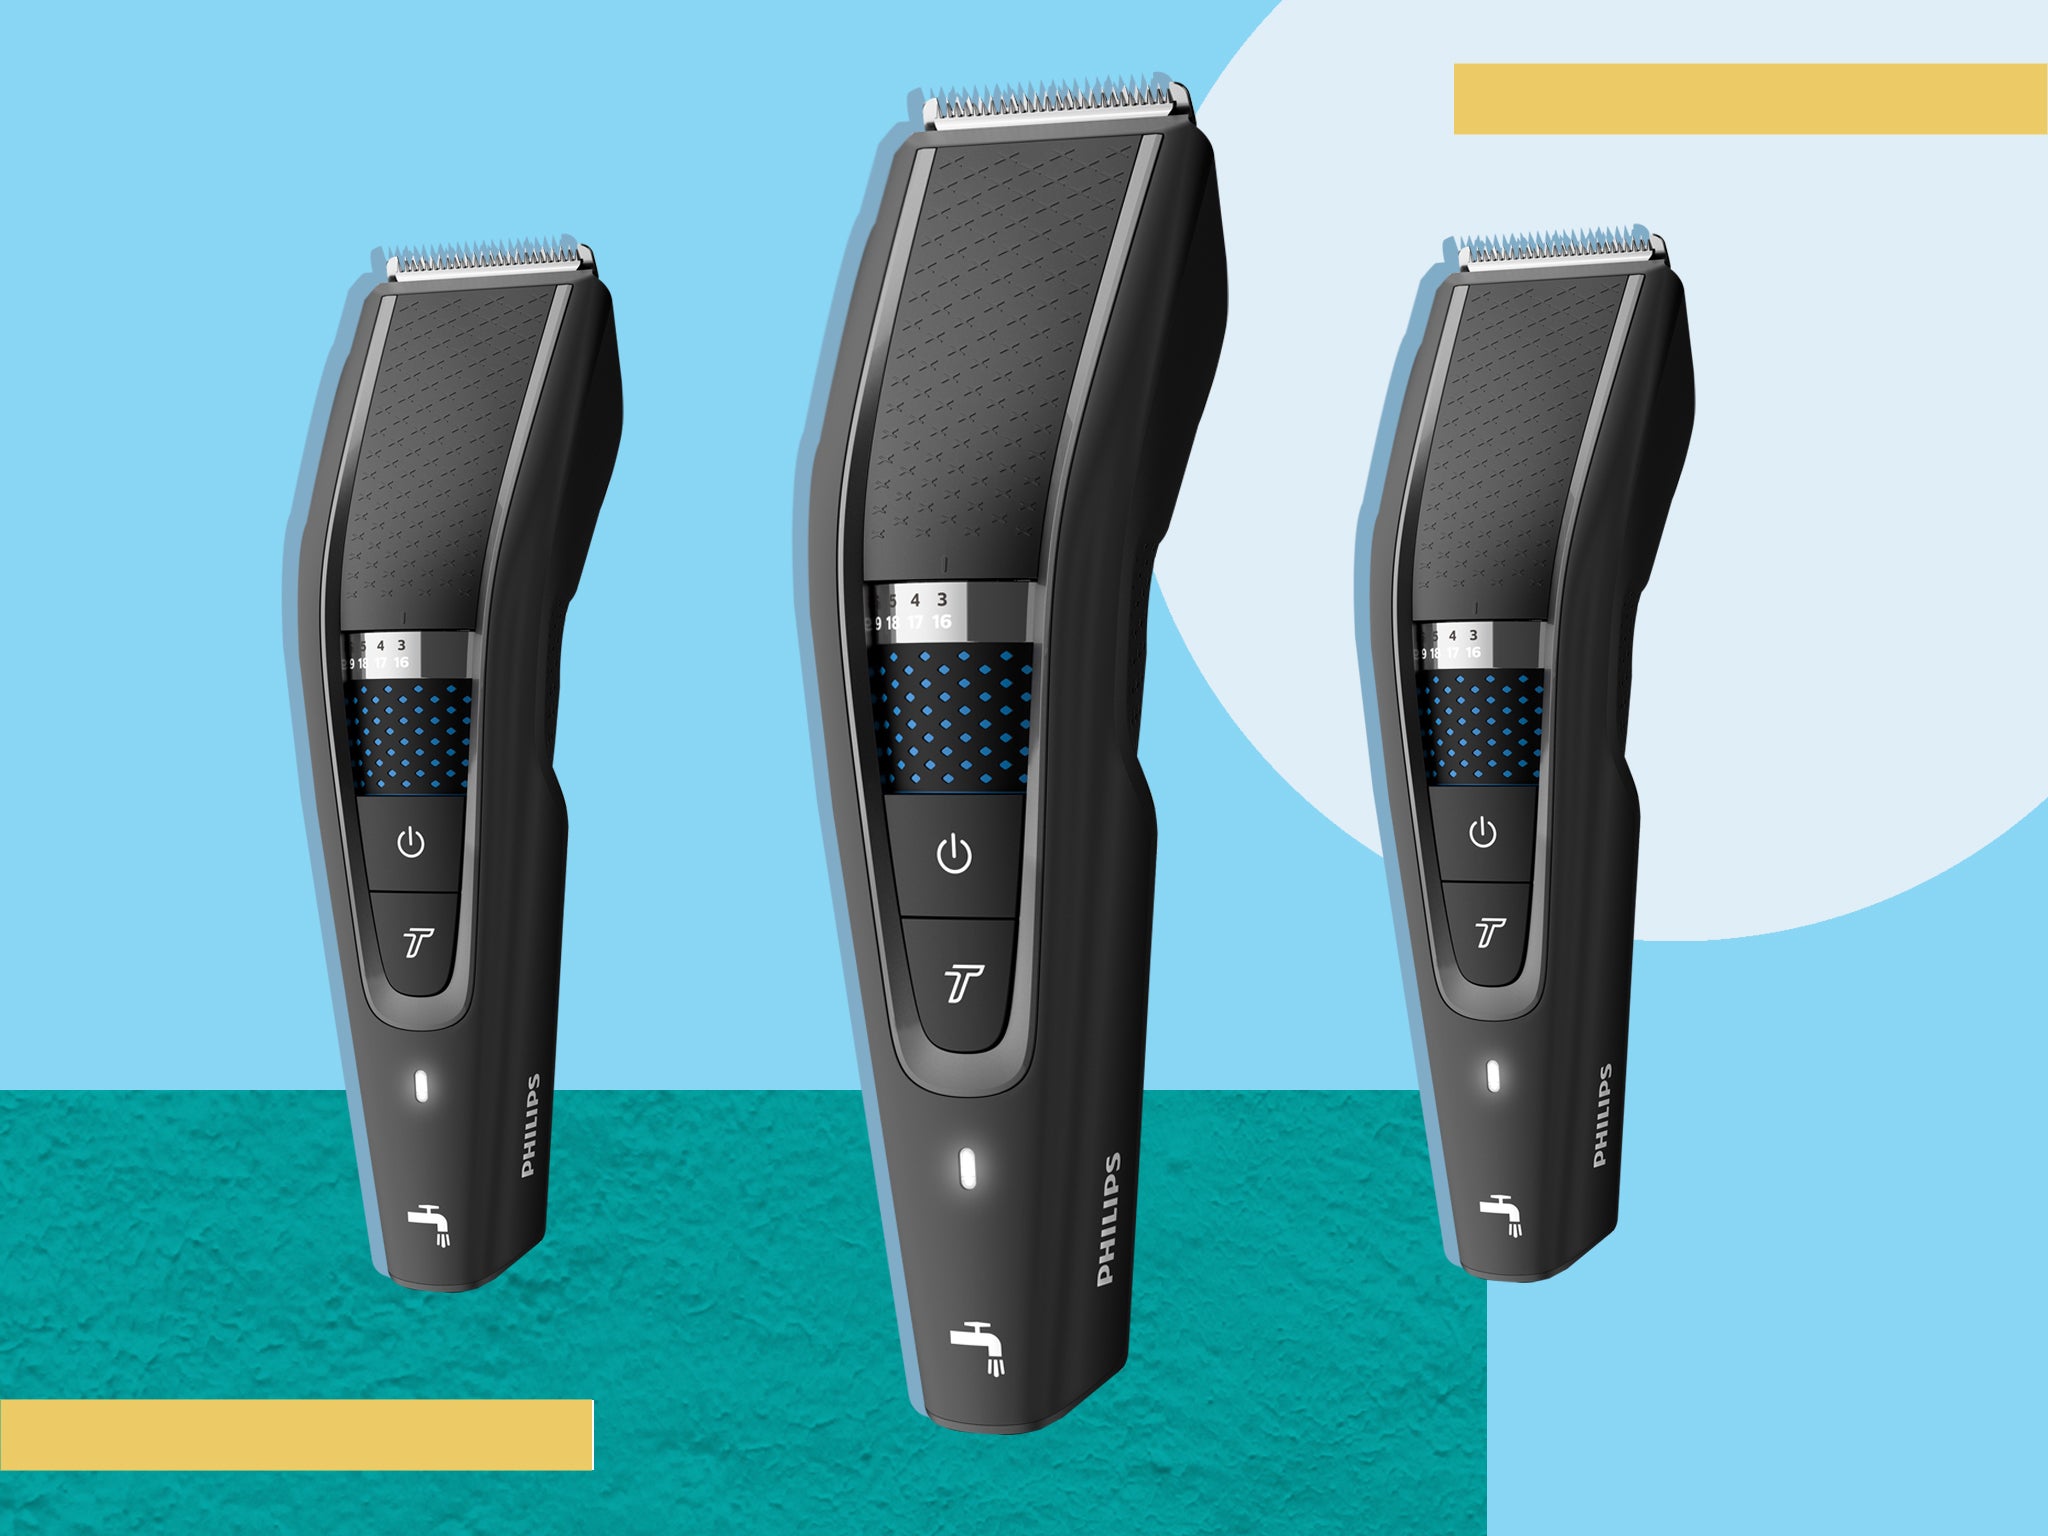 https://static.independent.co.uk/2021/09/20/09/Philips%20Series%20HC5632%20hair%20clipper%20copy.jpg